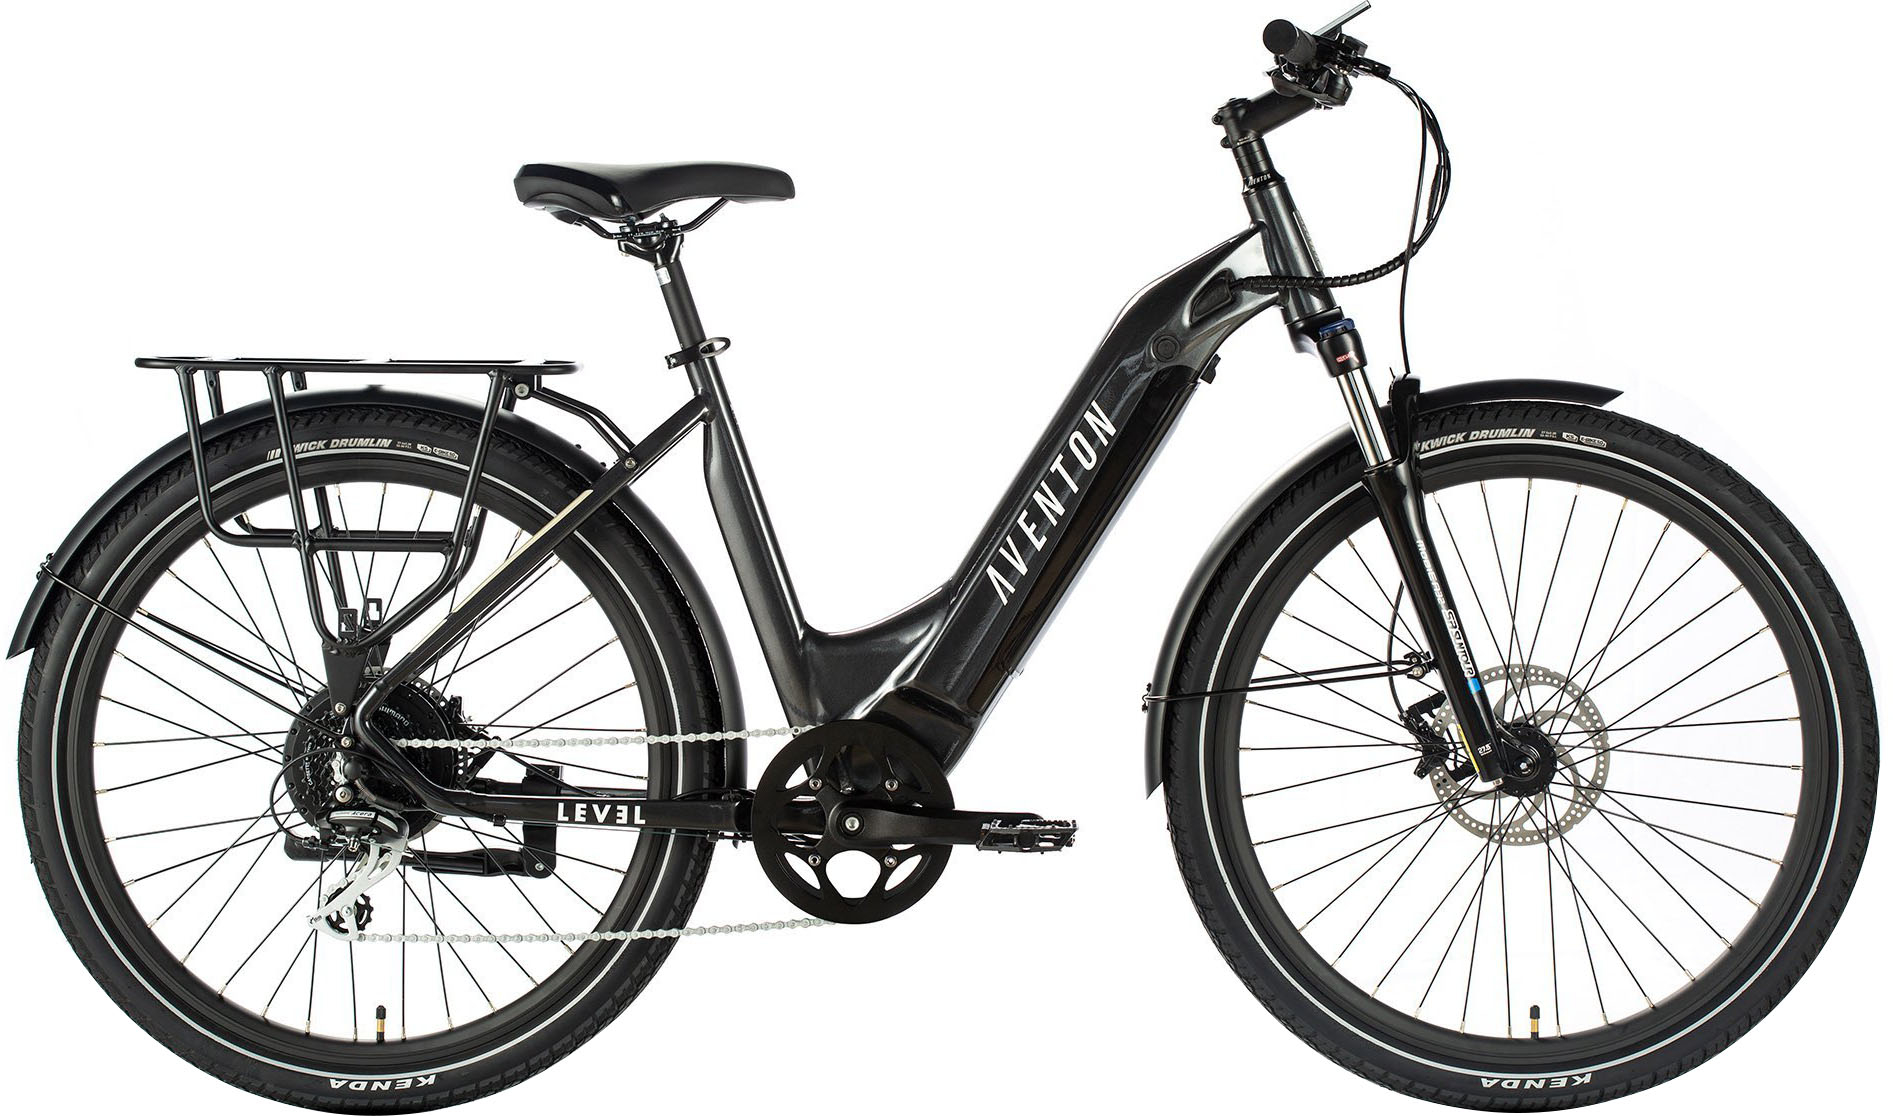 Aventon - Level Commuter Step-Through Ebike w/ 40 mile Max Operating Range and 28 MPH Max Speed - Medium/Large - Earth Grey